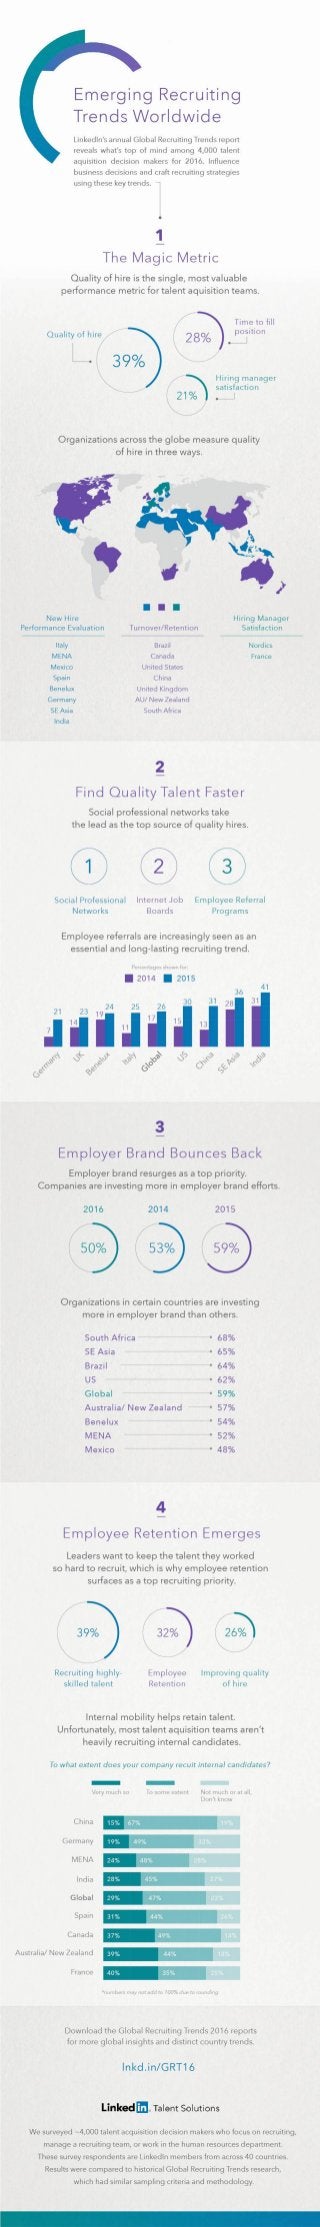 Global Recruiting Trends 2016 [Infographic]